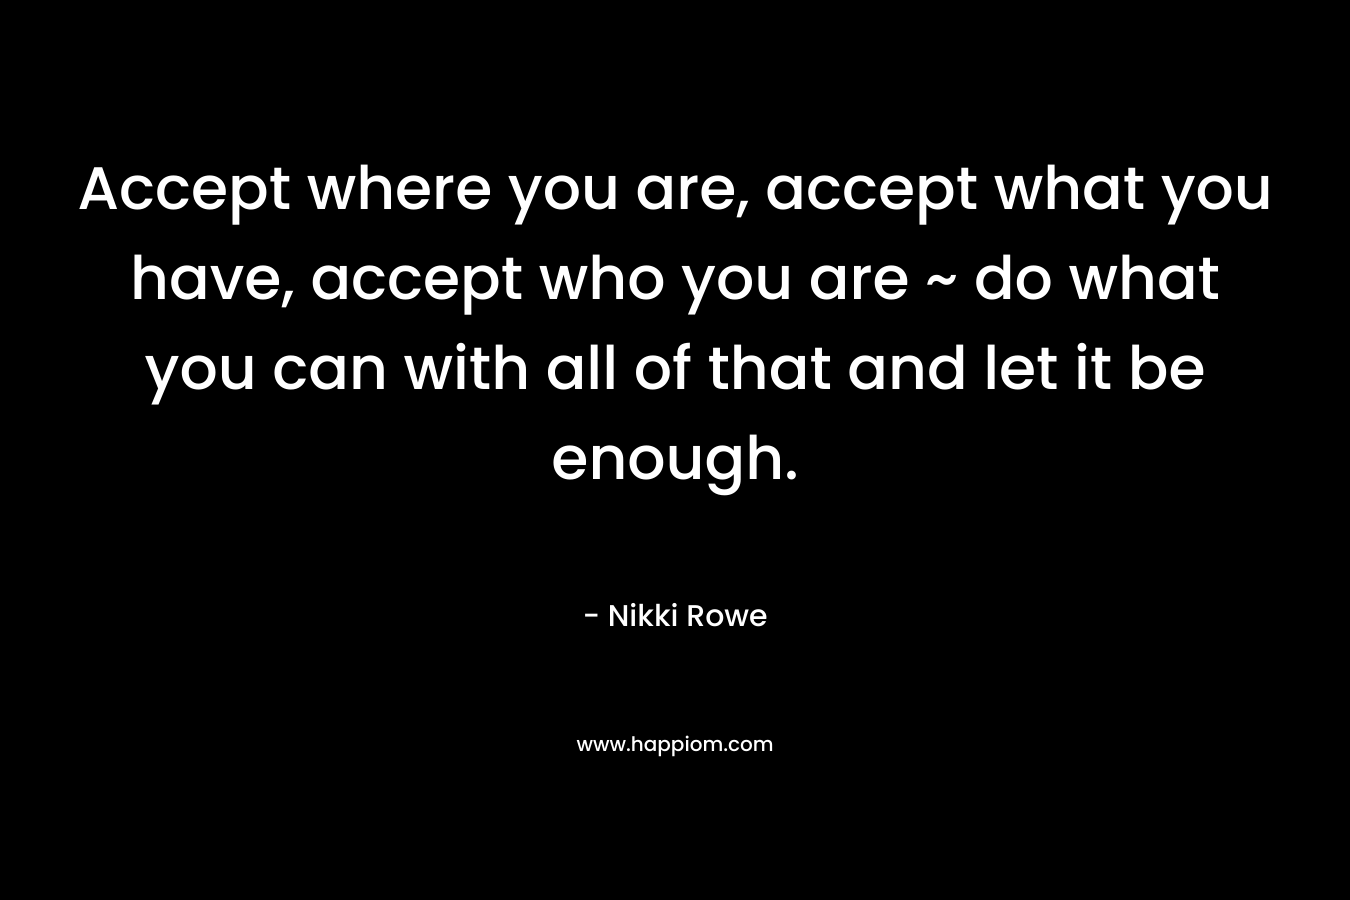 Accept where you are, accept what you have, accept who you are ~ do what you can with all of that and let it be enough.